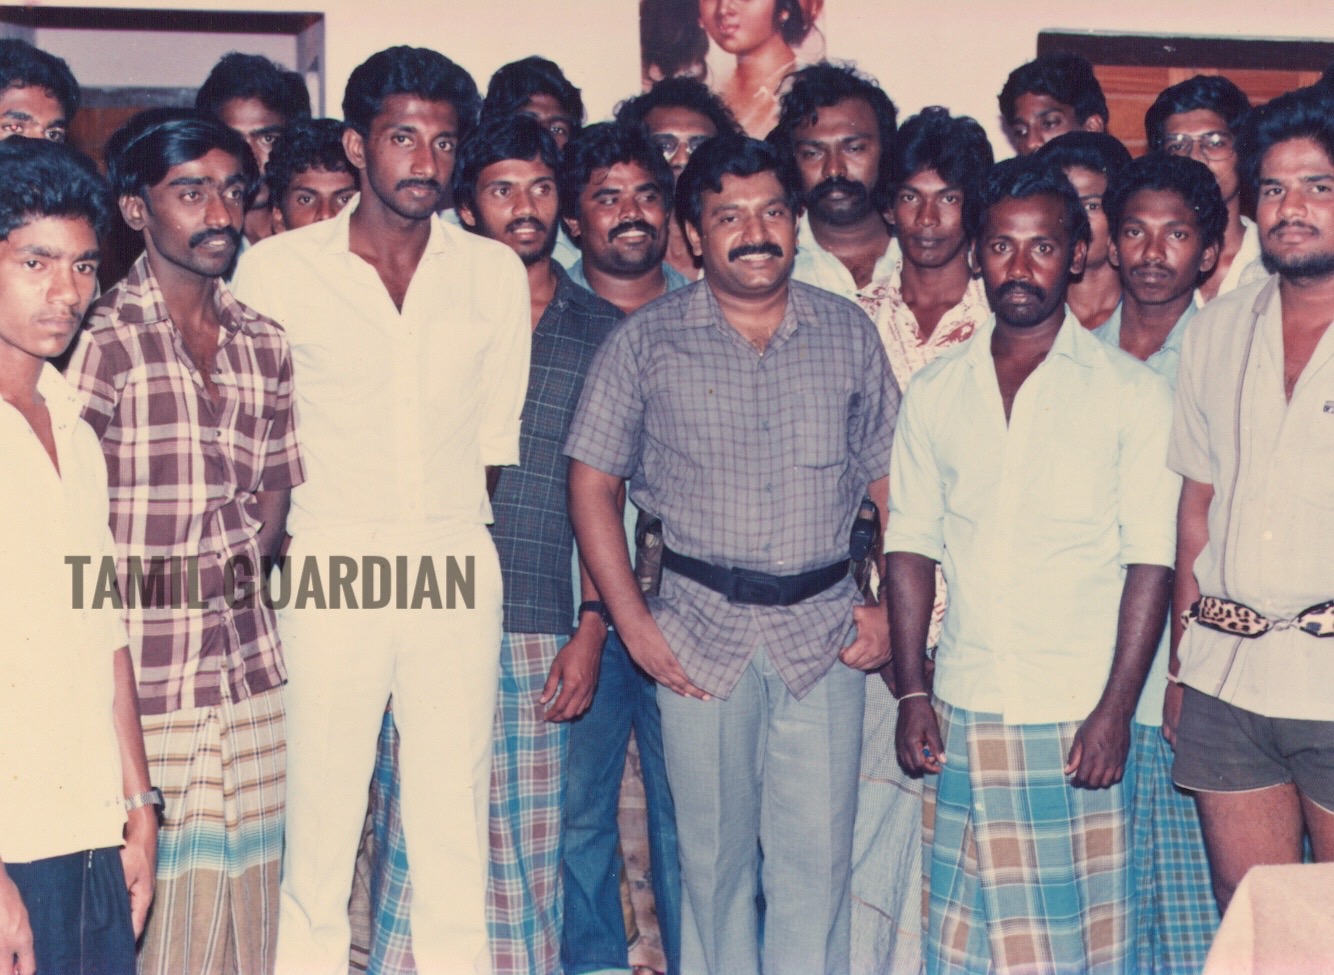 The Birth Of The Ltte Tamil Guardian